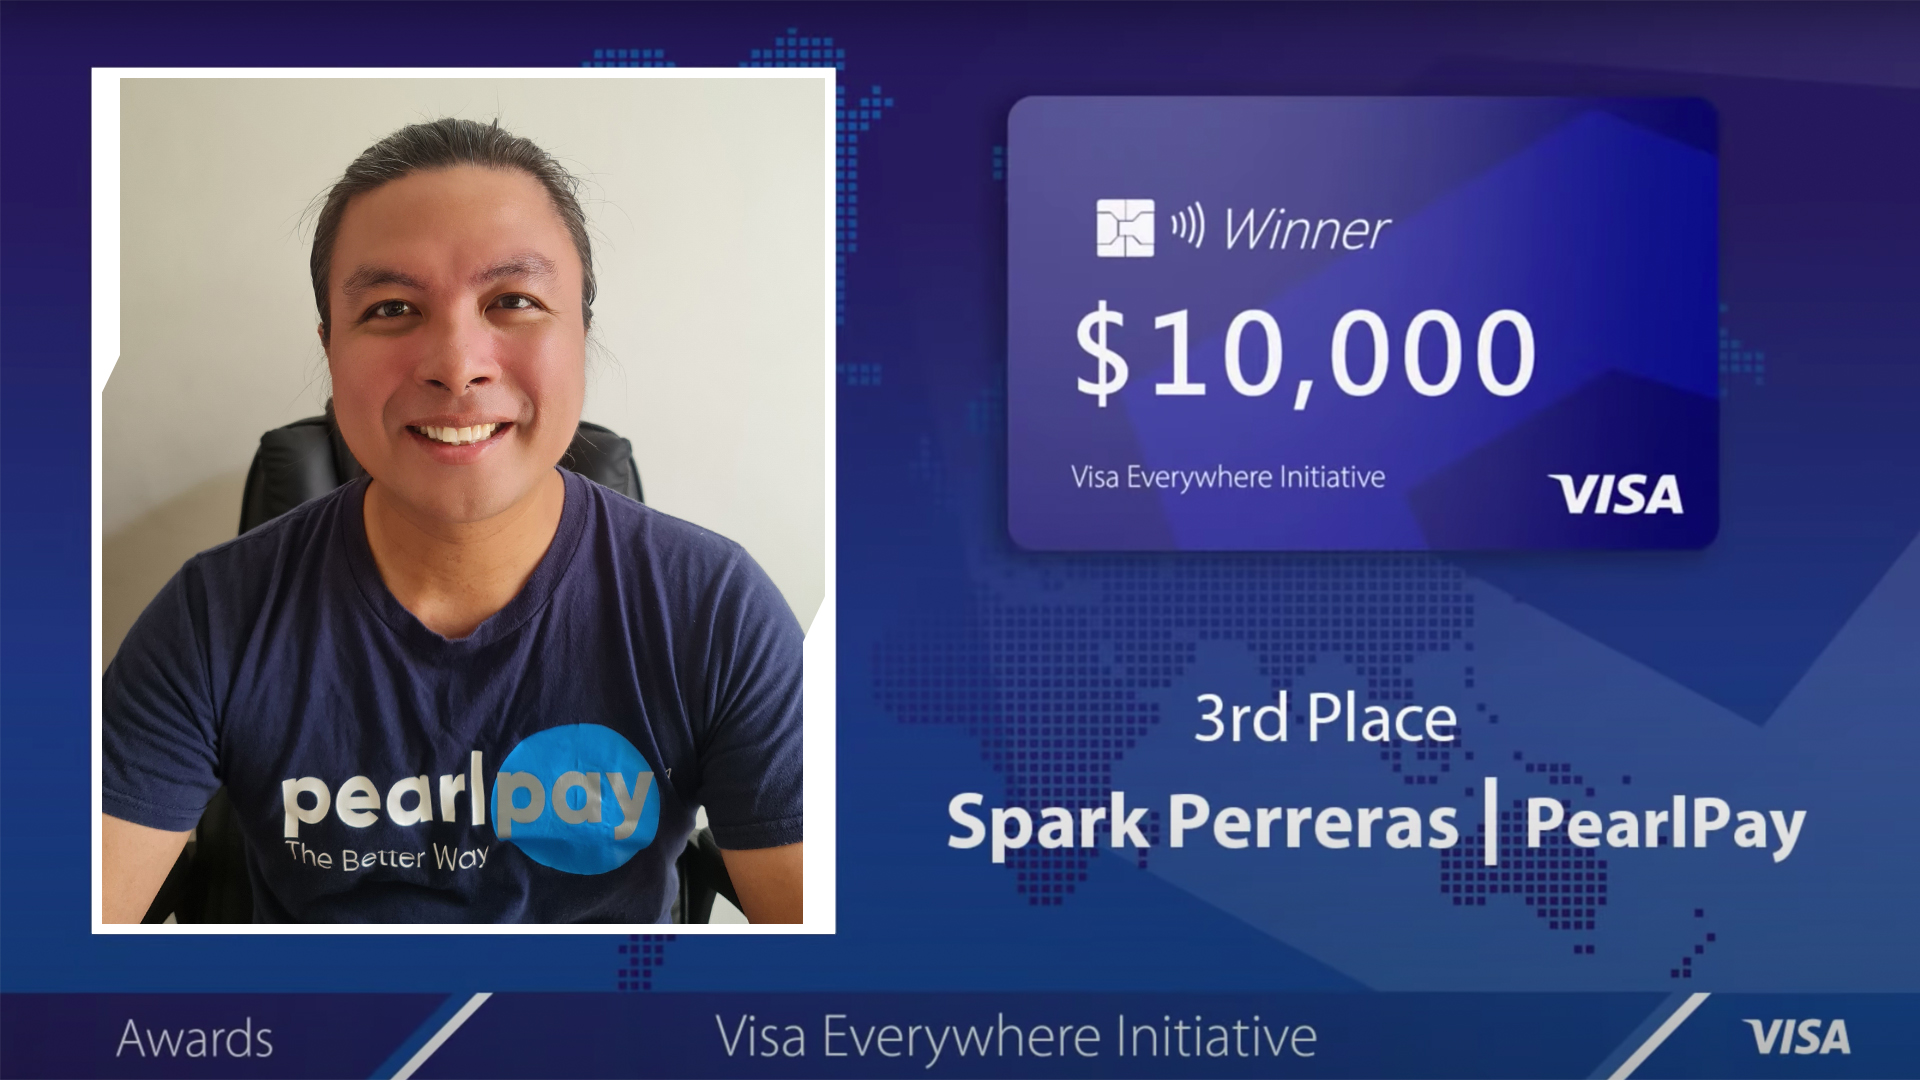 PearlPay Bags 3rd Place at the Visa Everywhere Initiative Global Finals 2021 Banner